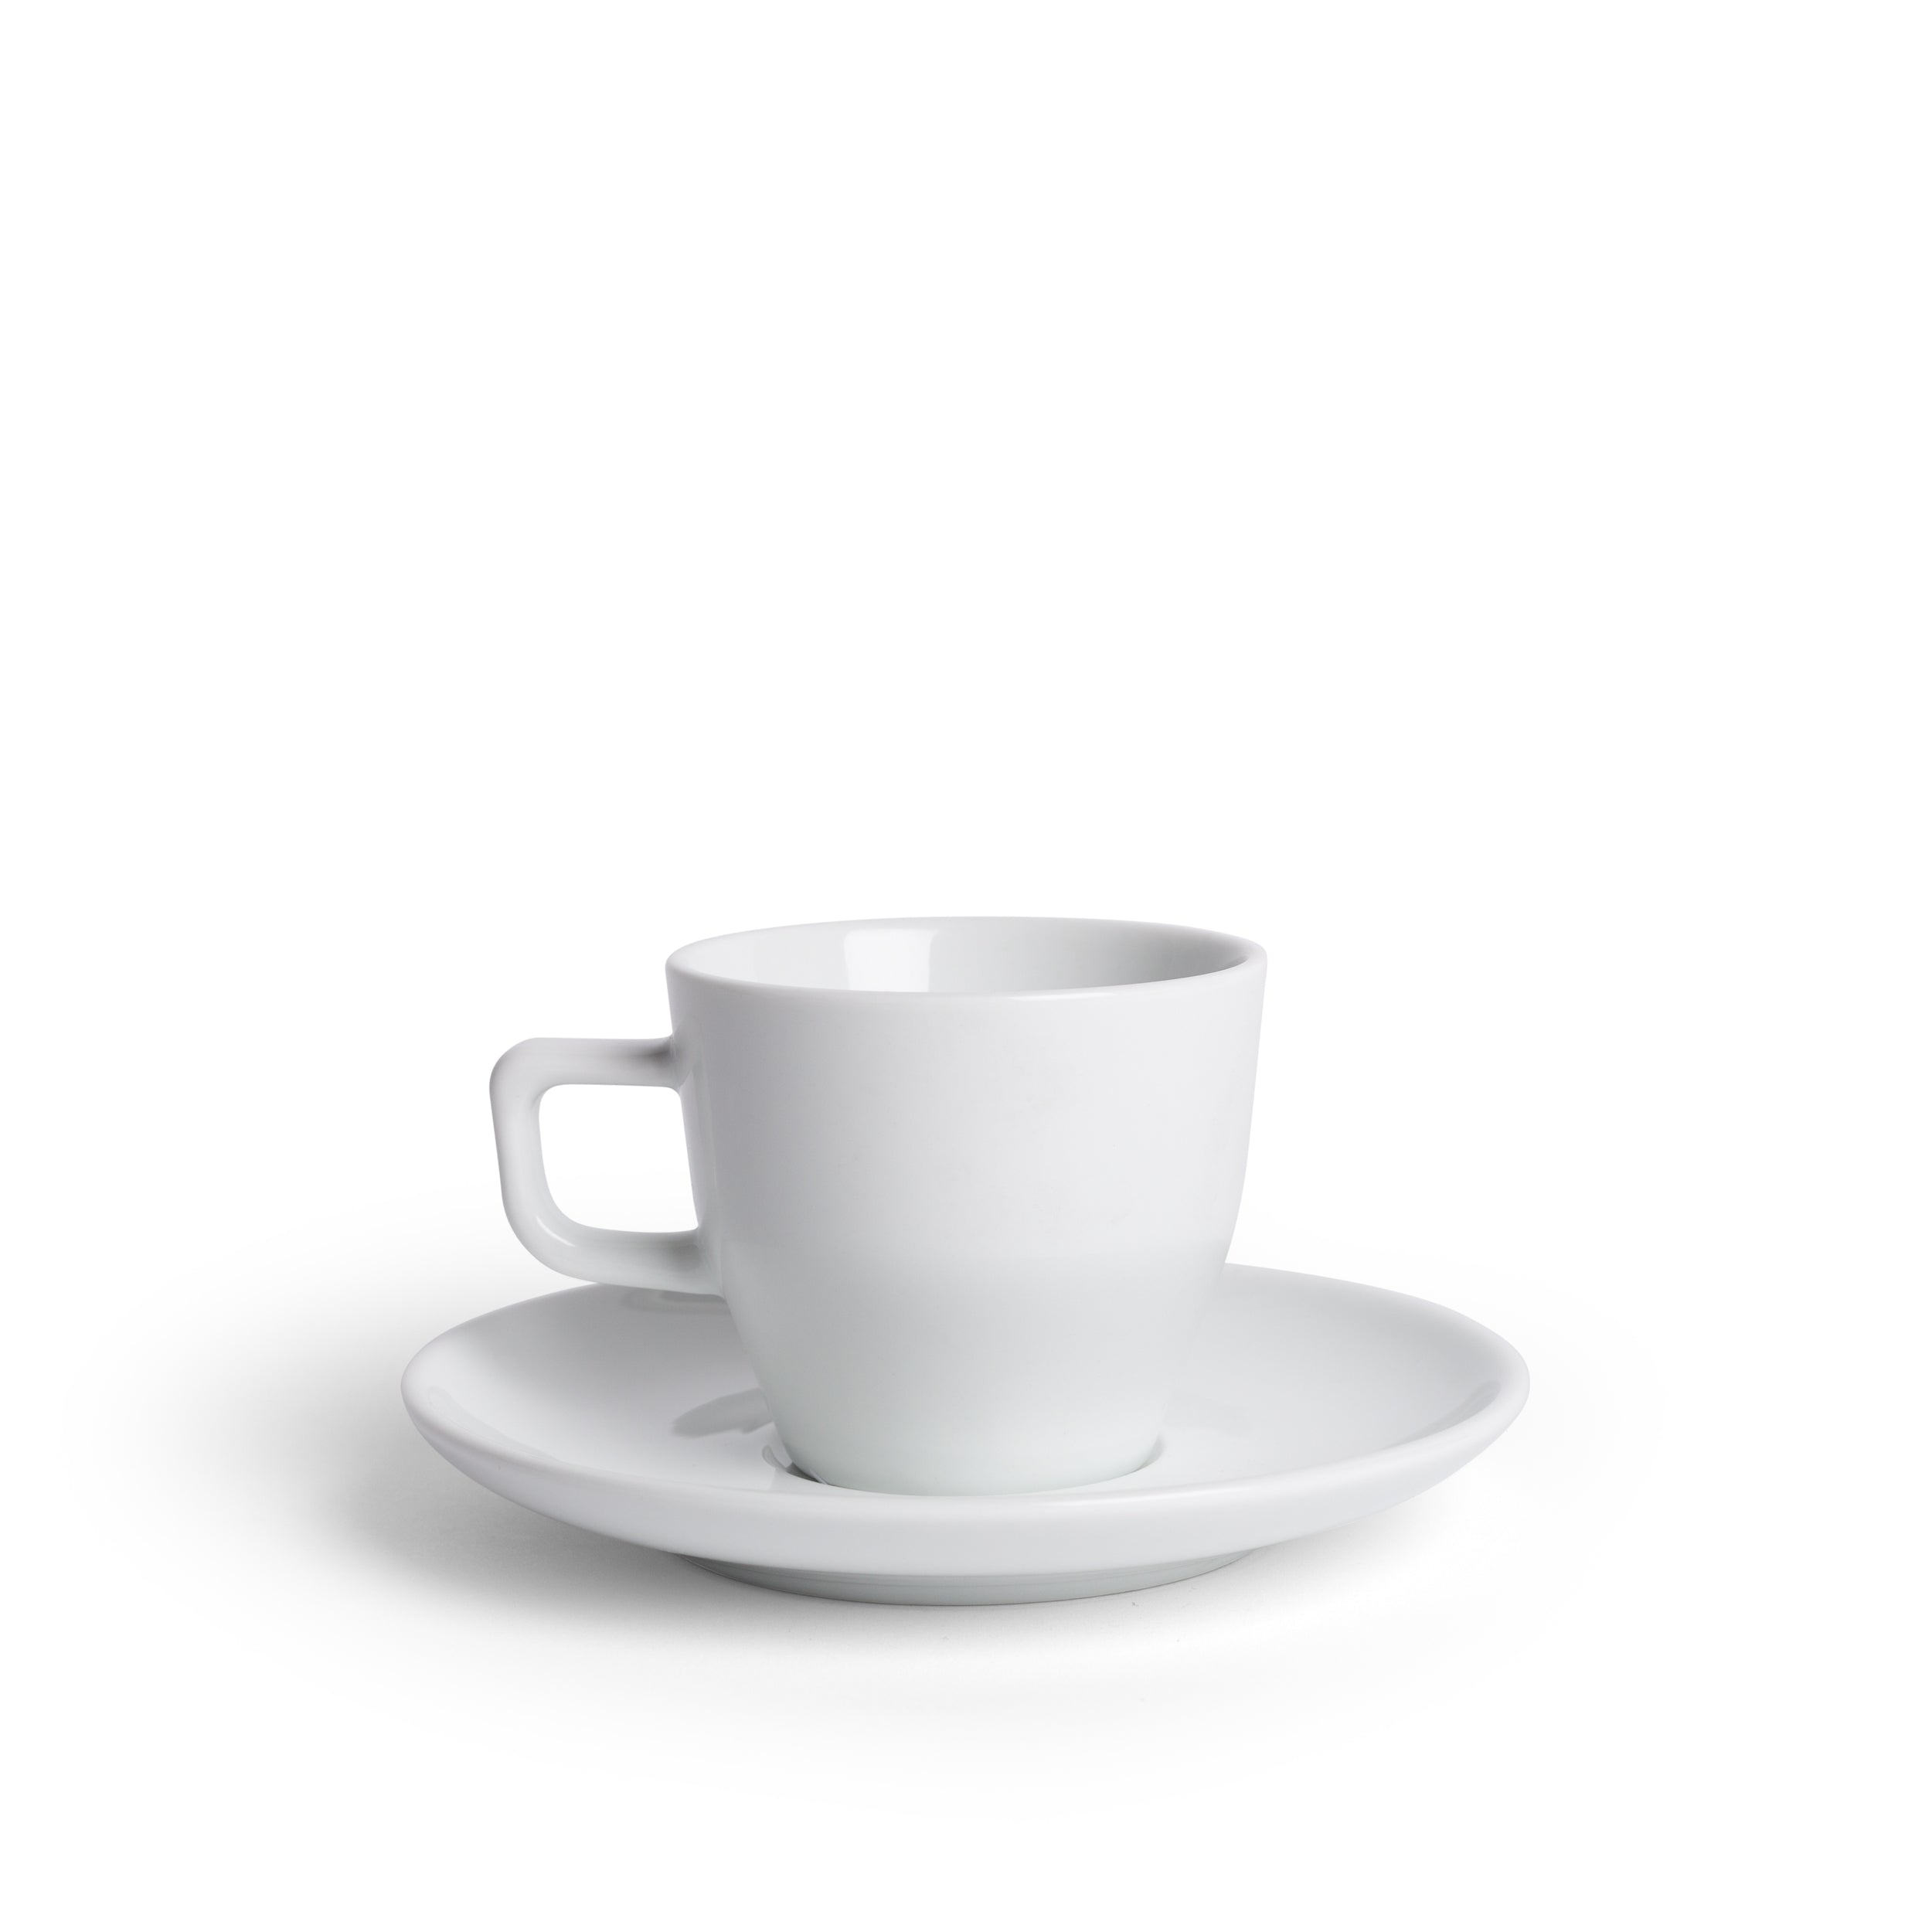 Acme Evo Latte Cup - Rata Red - Set of 6